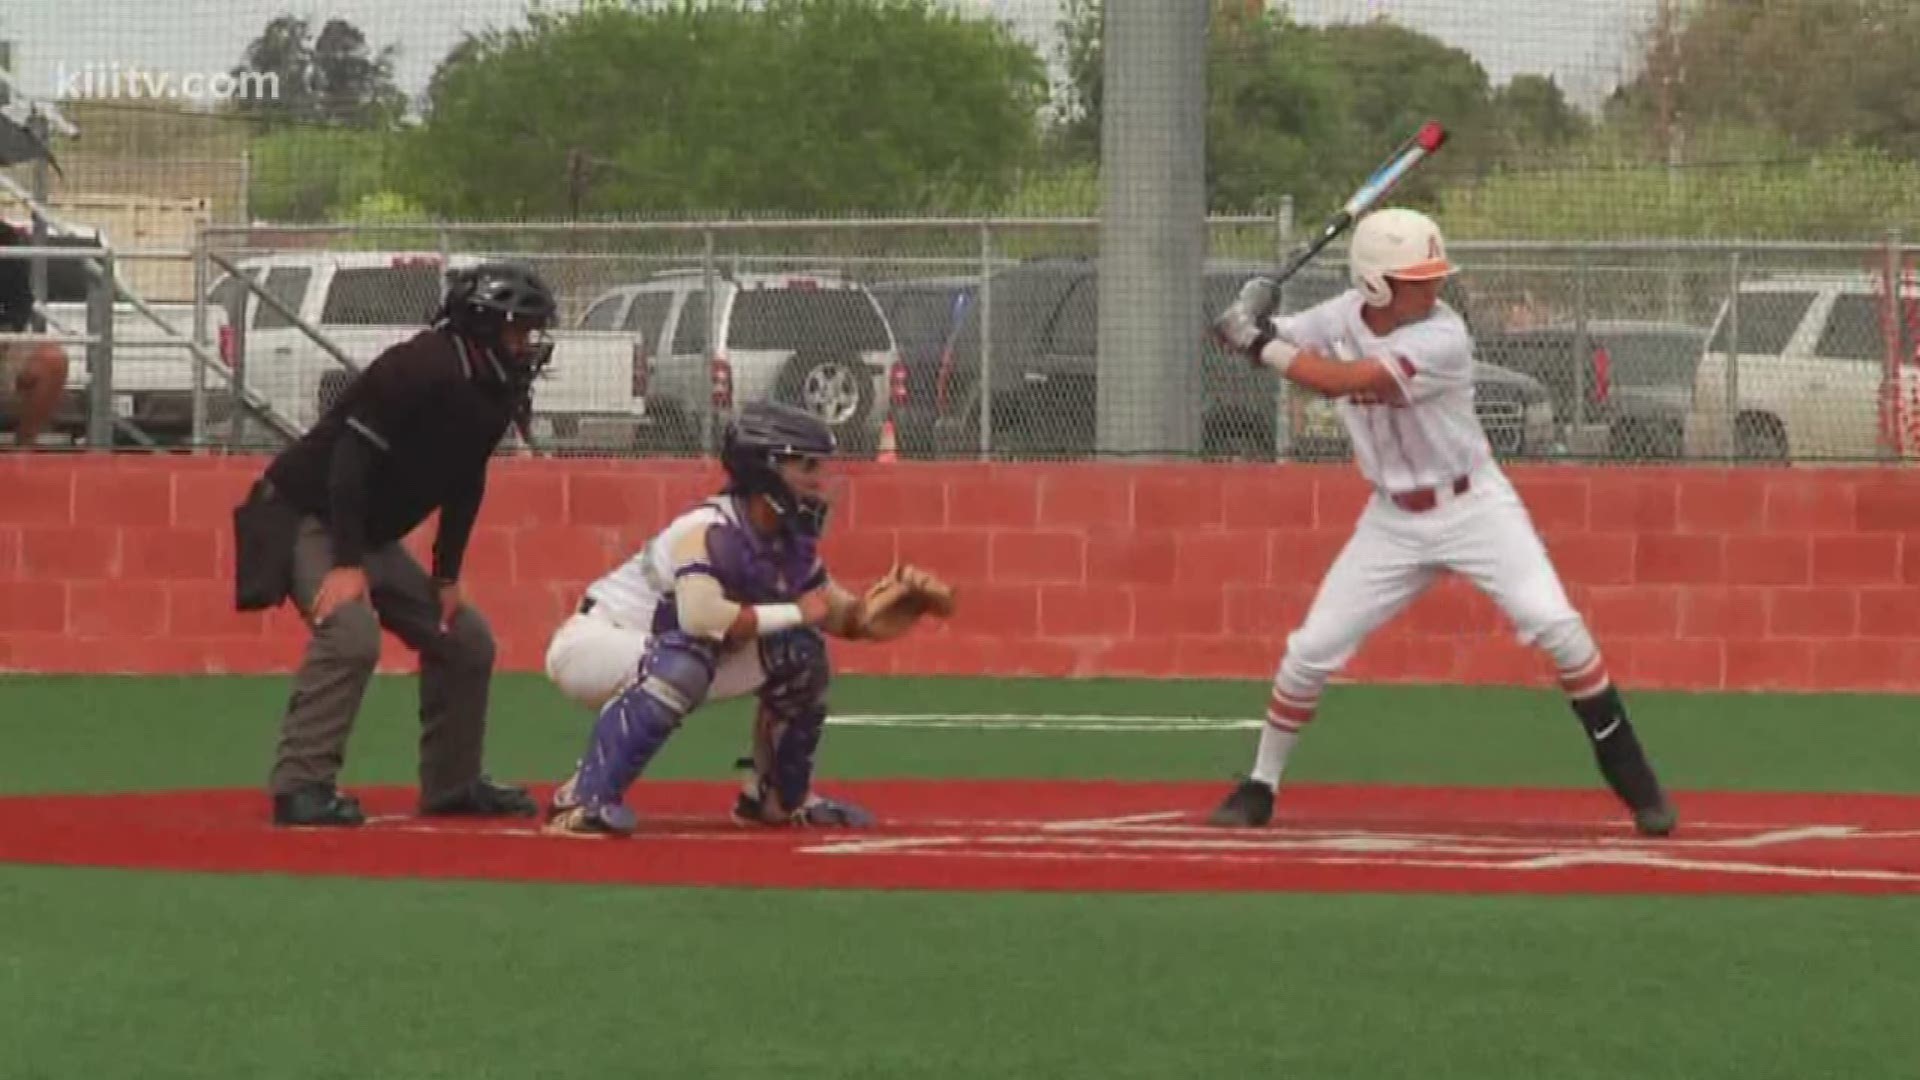 Highlights from three baseball games that include teams from the Coastal Bend.